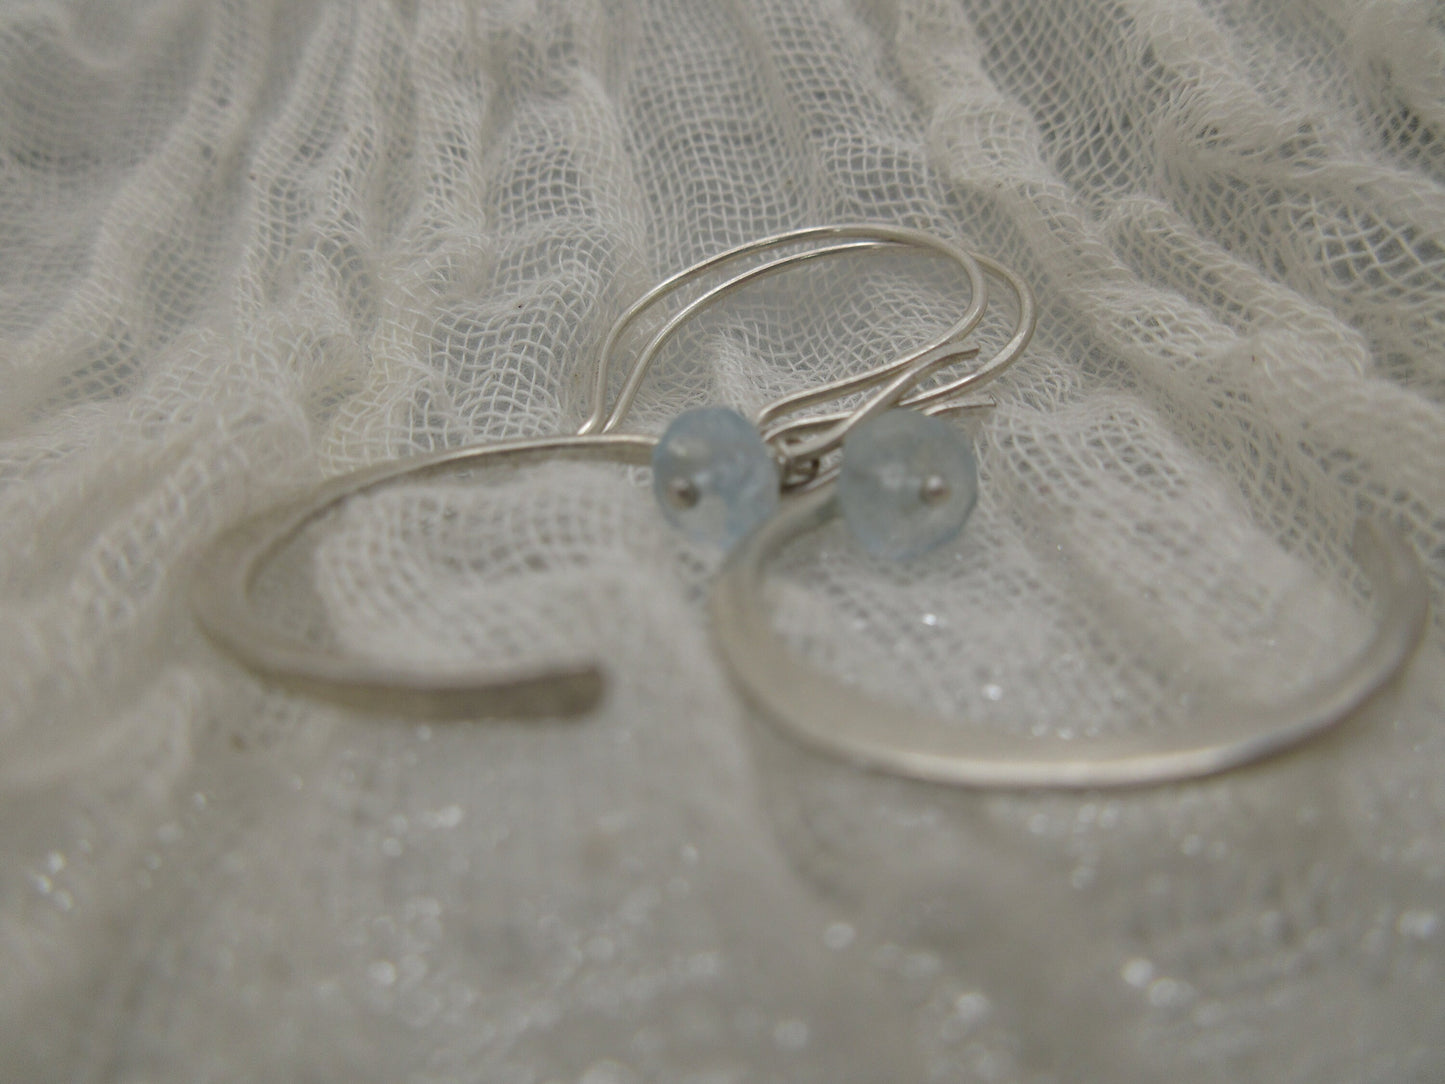 New Moon earrings in aquamarine and argentium sterling silver